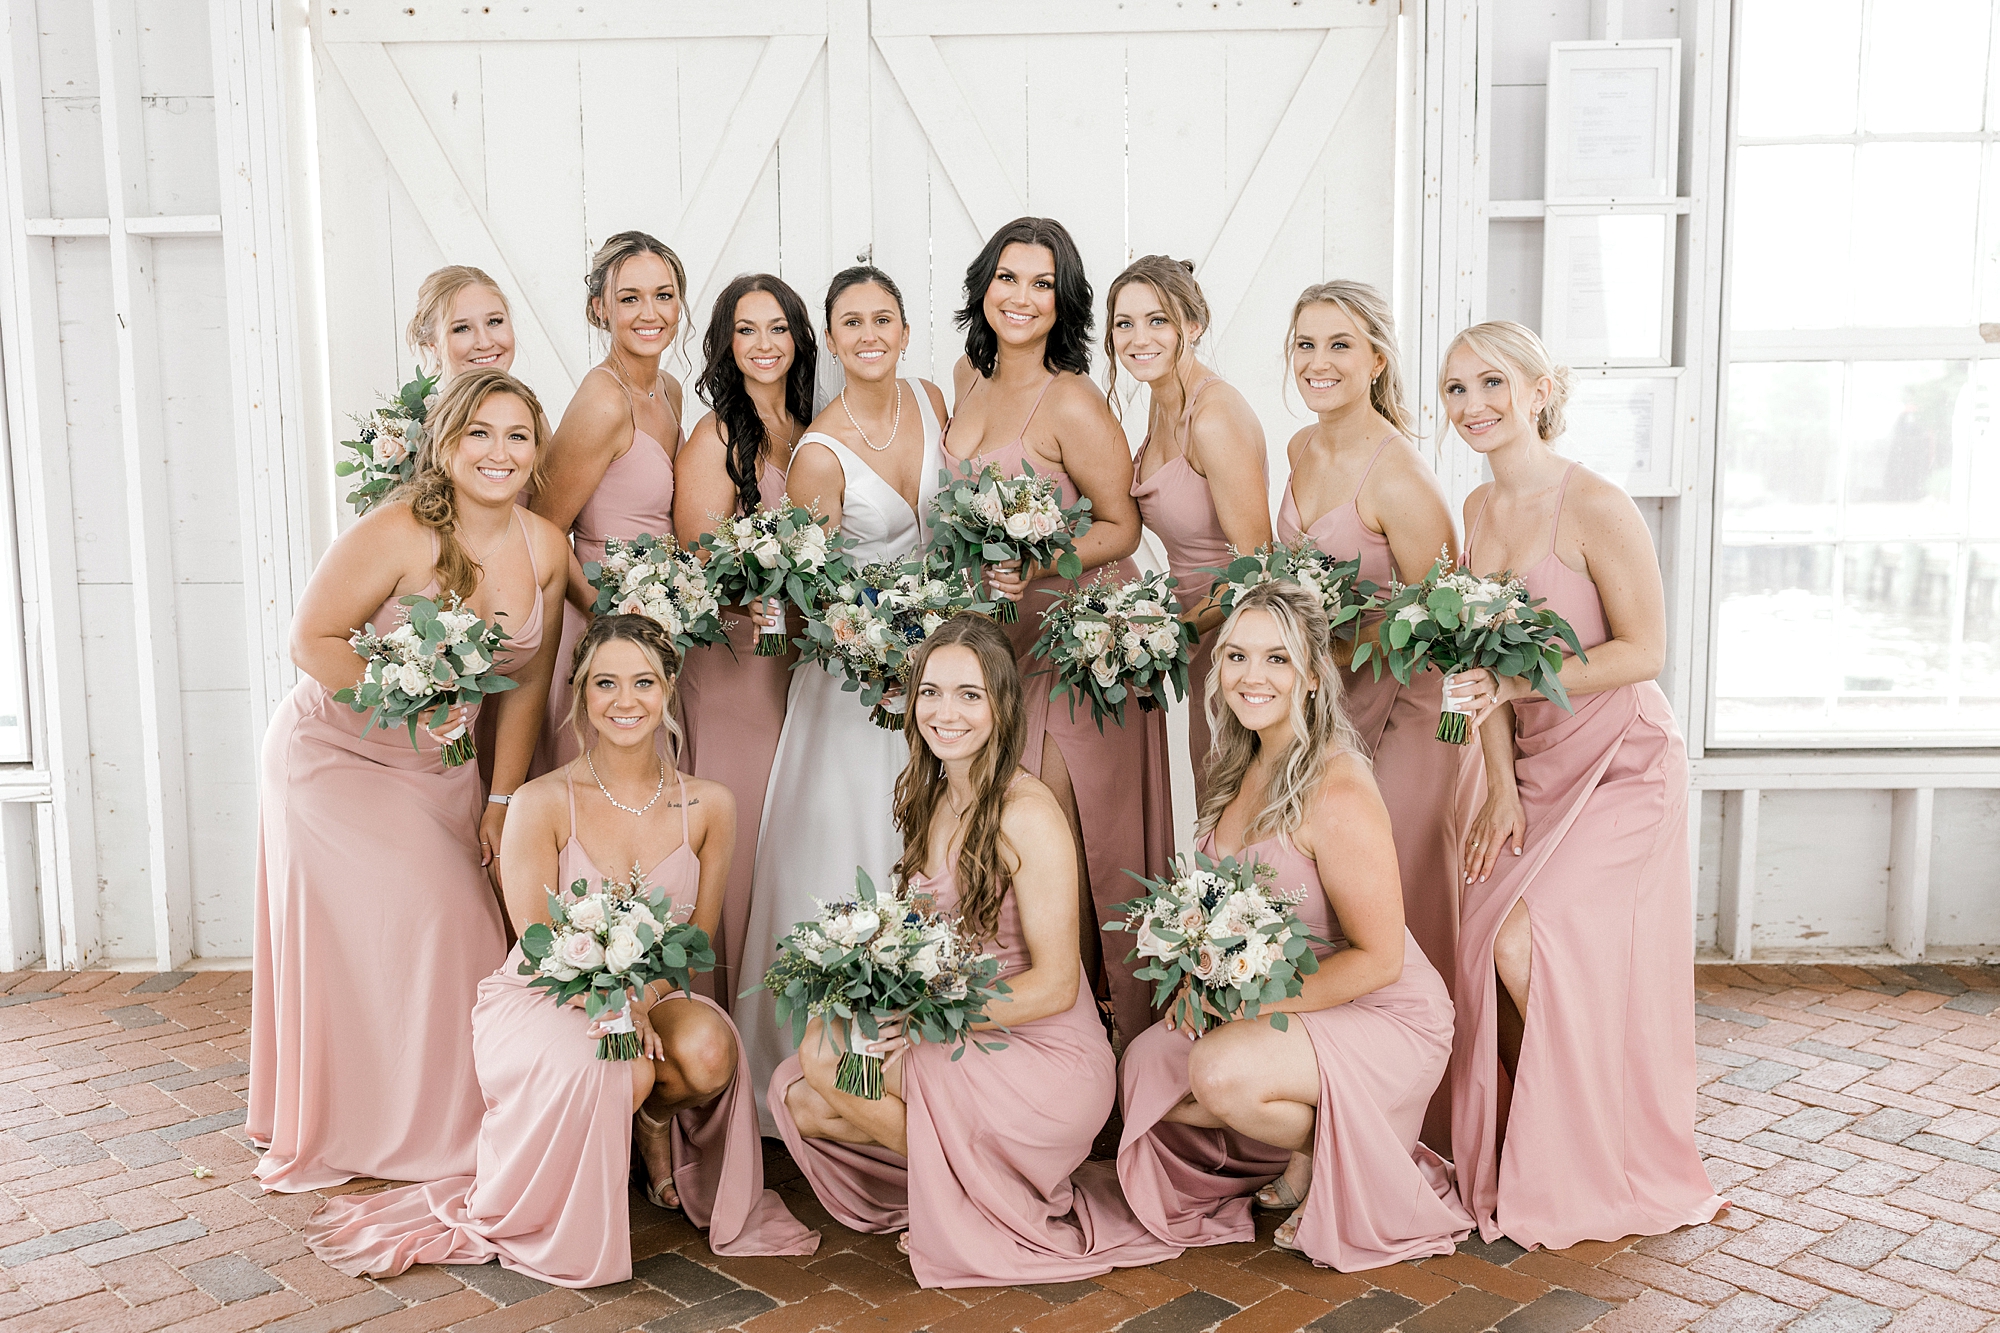 bride poses with bridesmaids in dusty pink gowns by stone fireplace at Mallard Island Yacht Club